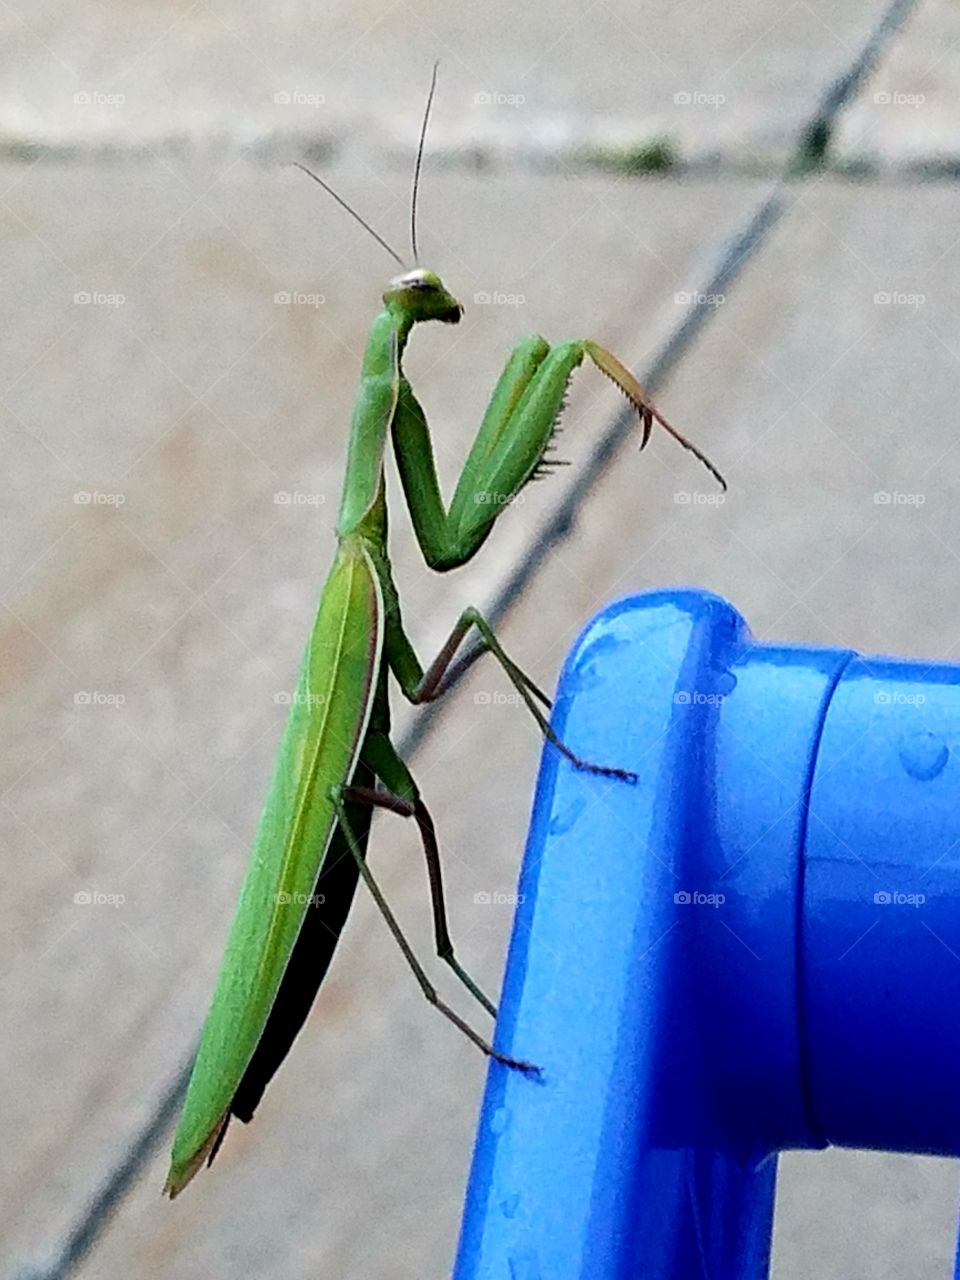 Praying Mantis. A rare sight, locally, considered lucky for those who get close enough for a photo